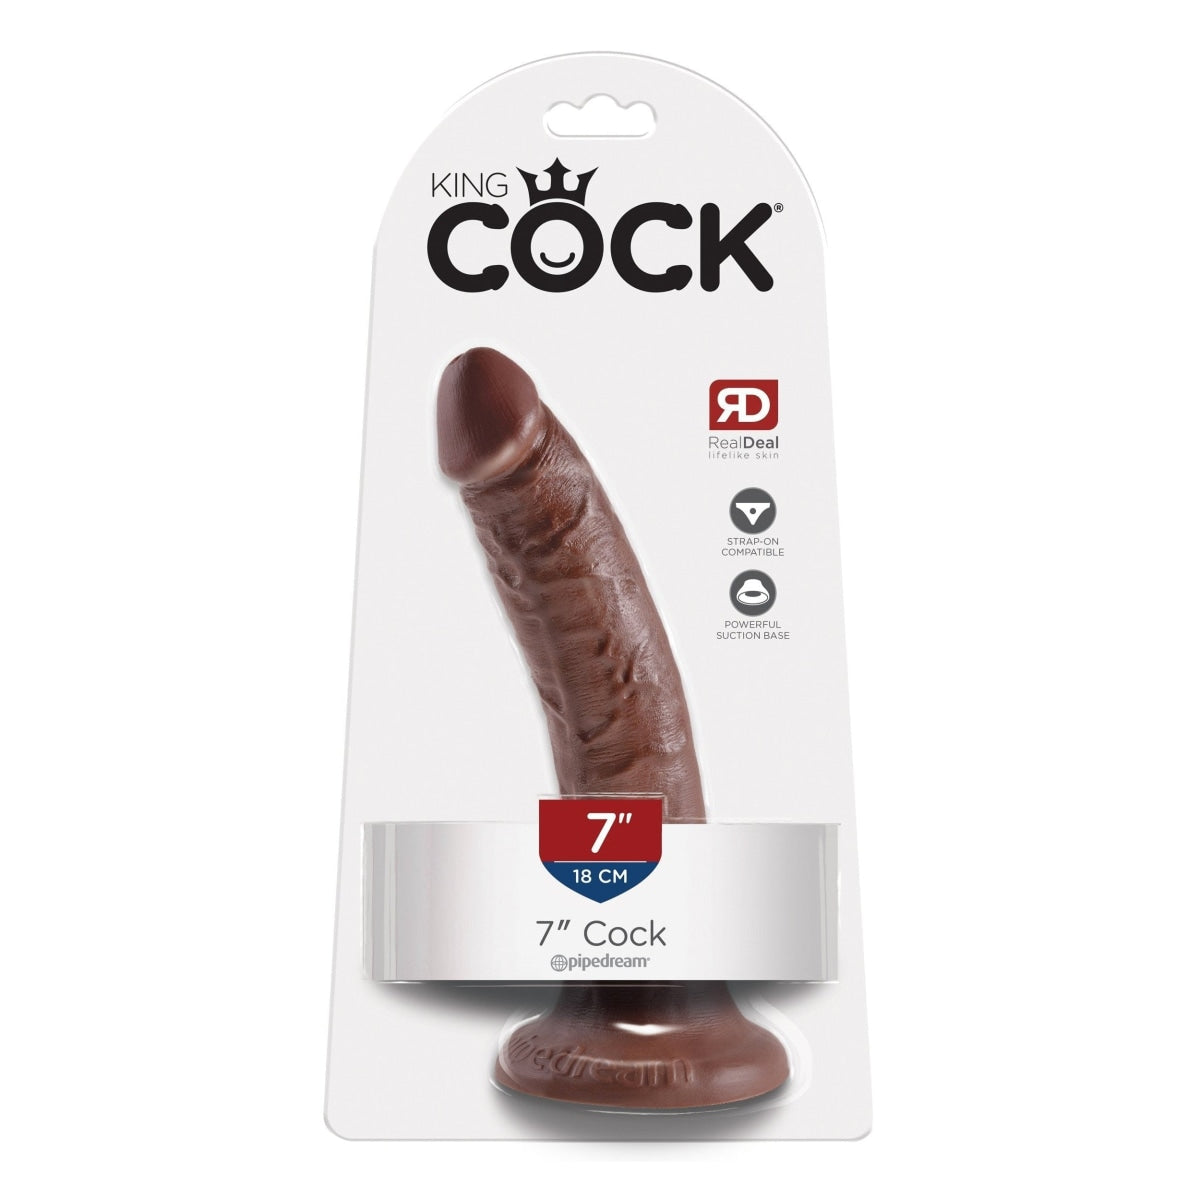 King Cock 7 In Cock Brown Intimates Adult Boutique